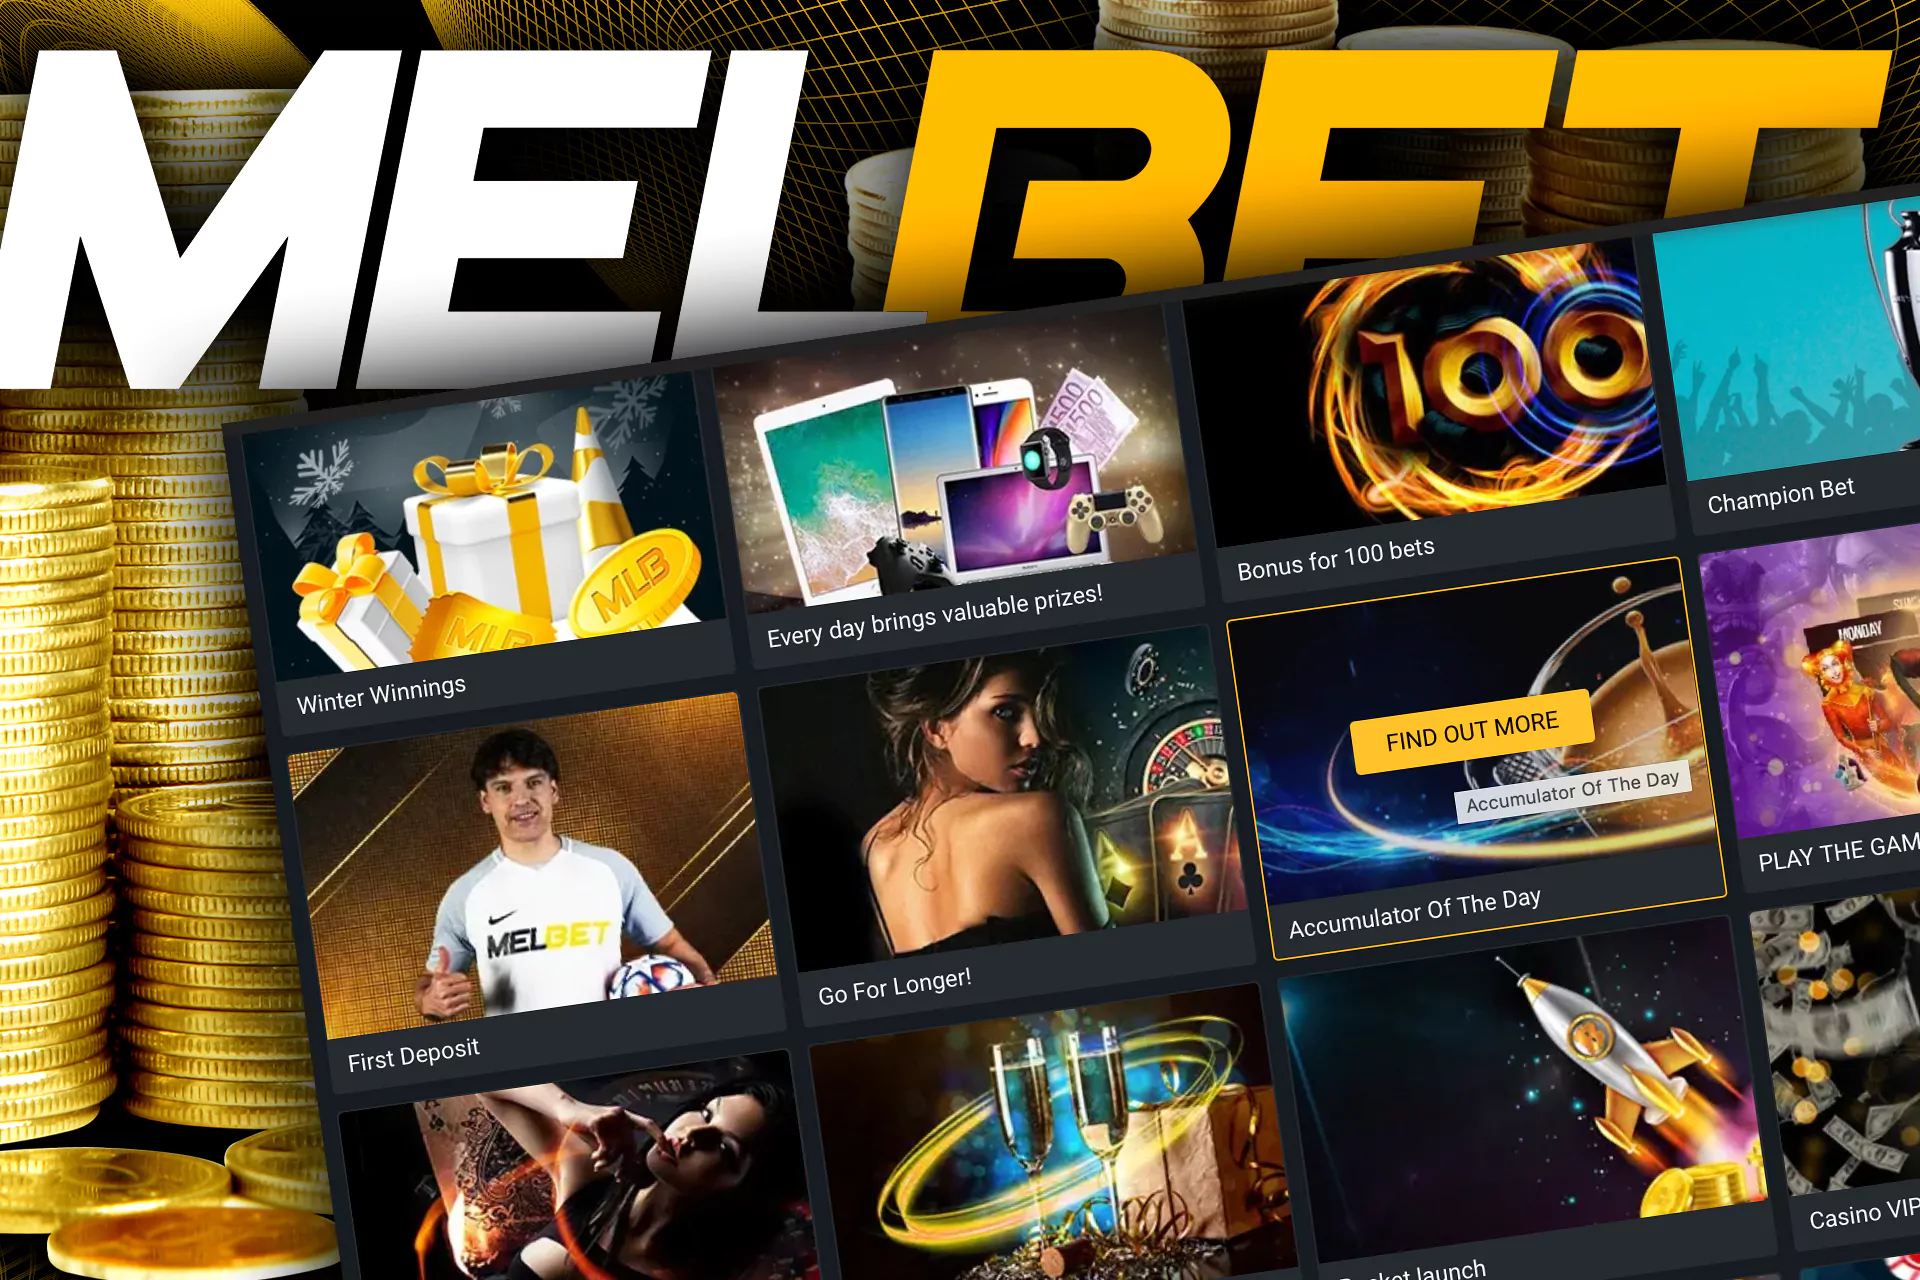 If you are not a newcomer at Melbet, look through the other bonus programs.